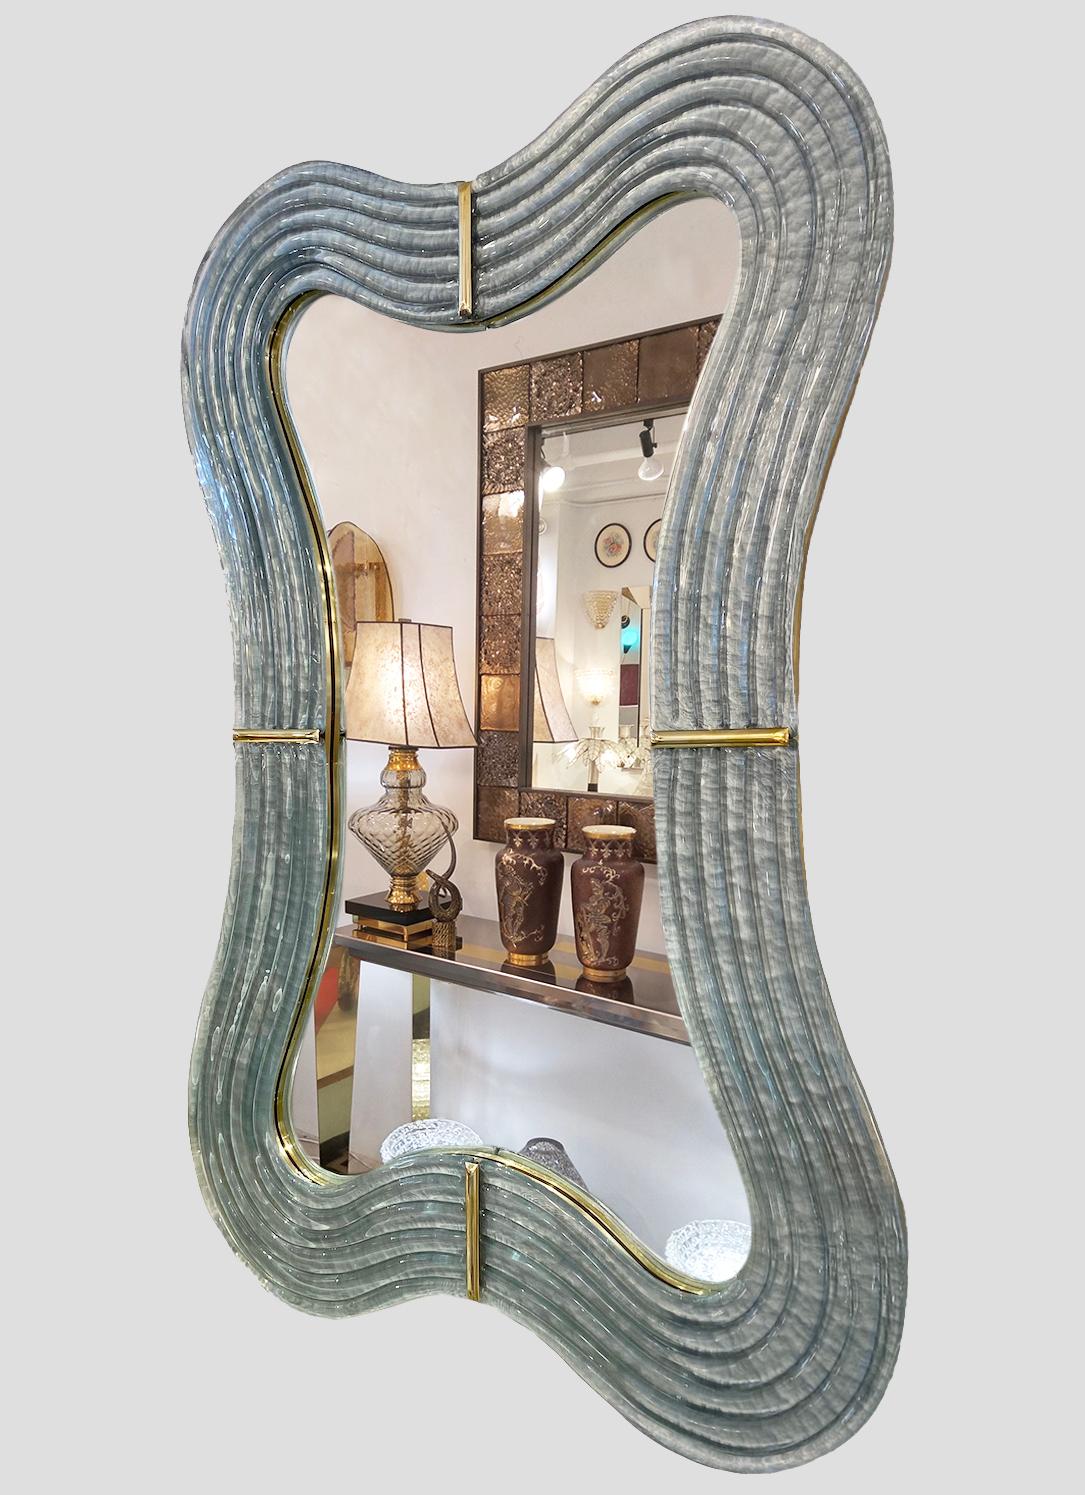 Contemporary Italian Pearl Gray Blue Murano Glass Curved Mirror & Brass Accents For Sale 1